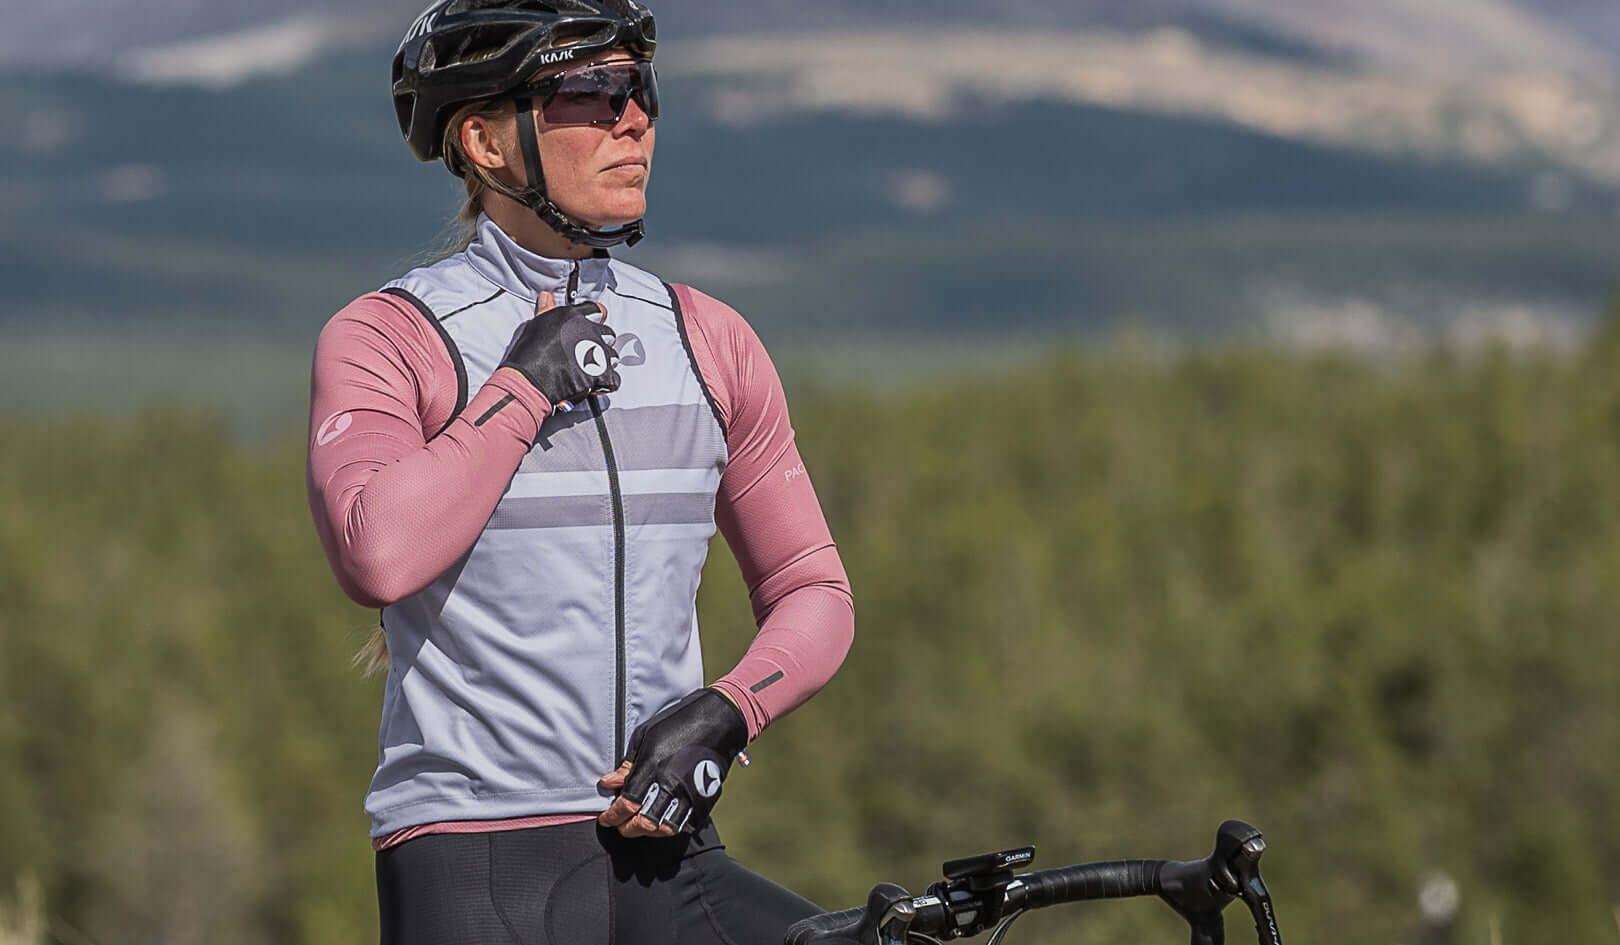 Cycling Vests for Men & Women